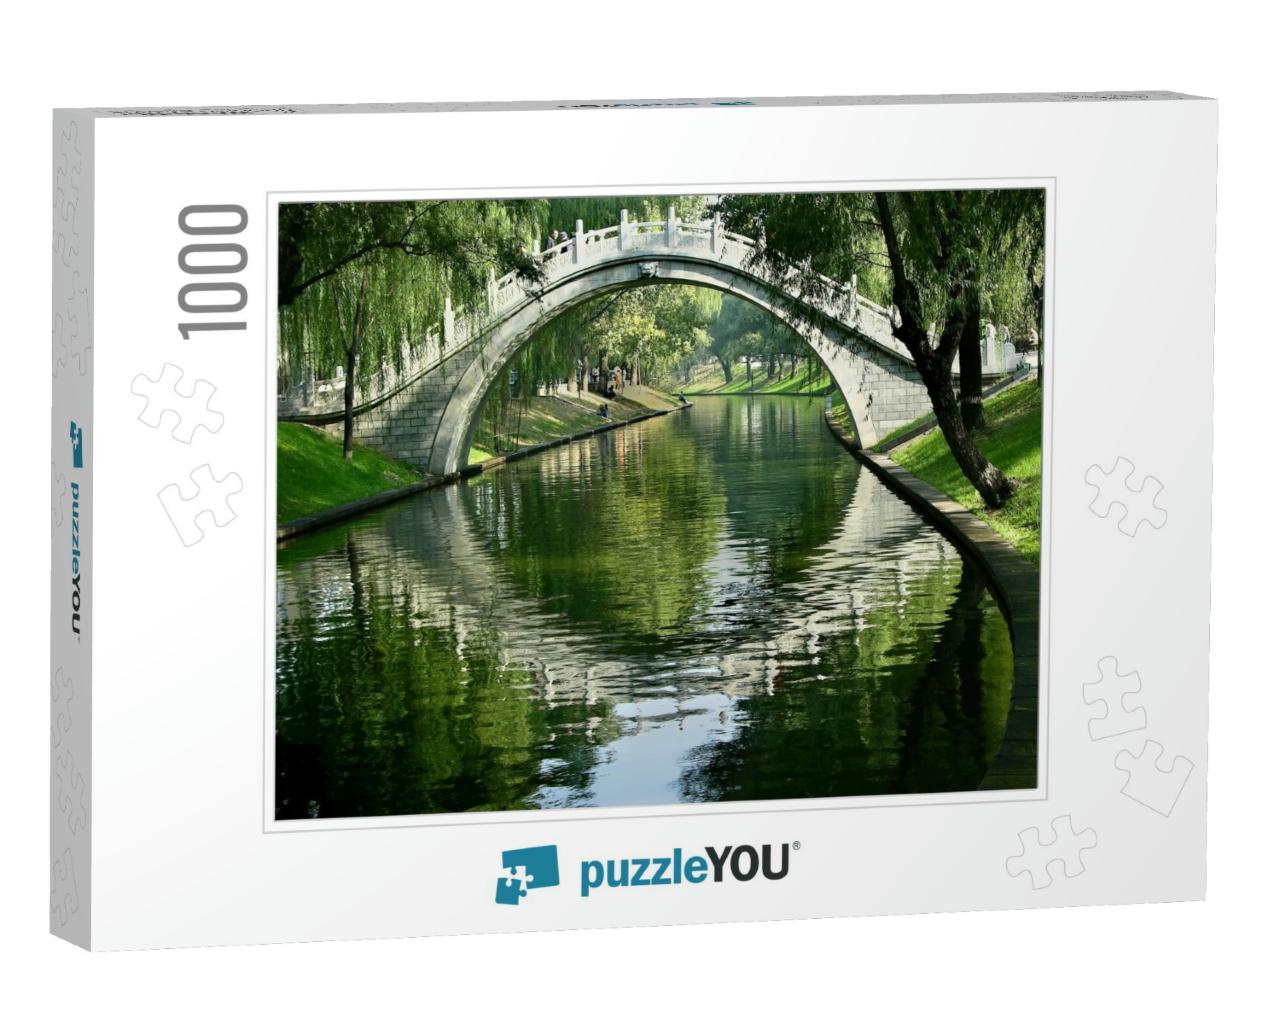 Moon Gate, Purple Bamboo Park, Beijing, China... Jigsaw Puzzle with 1000 pieces